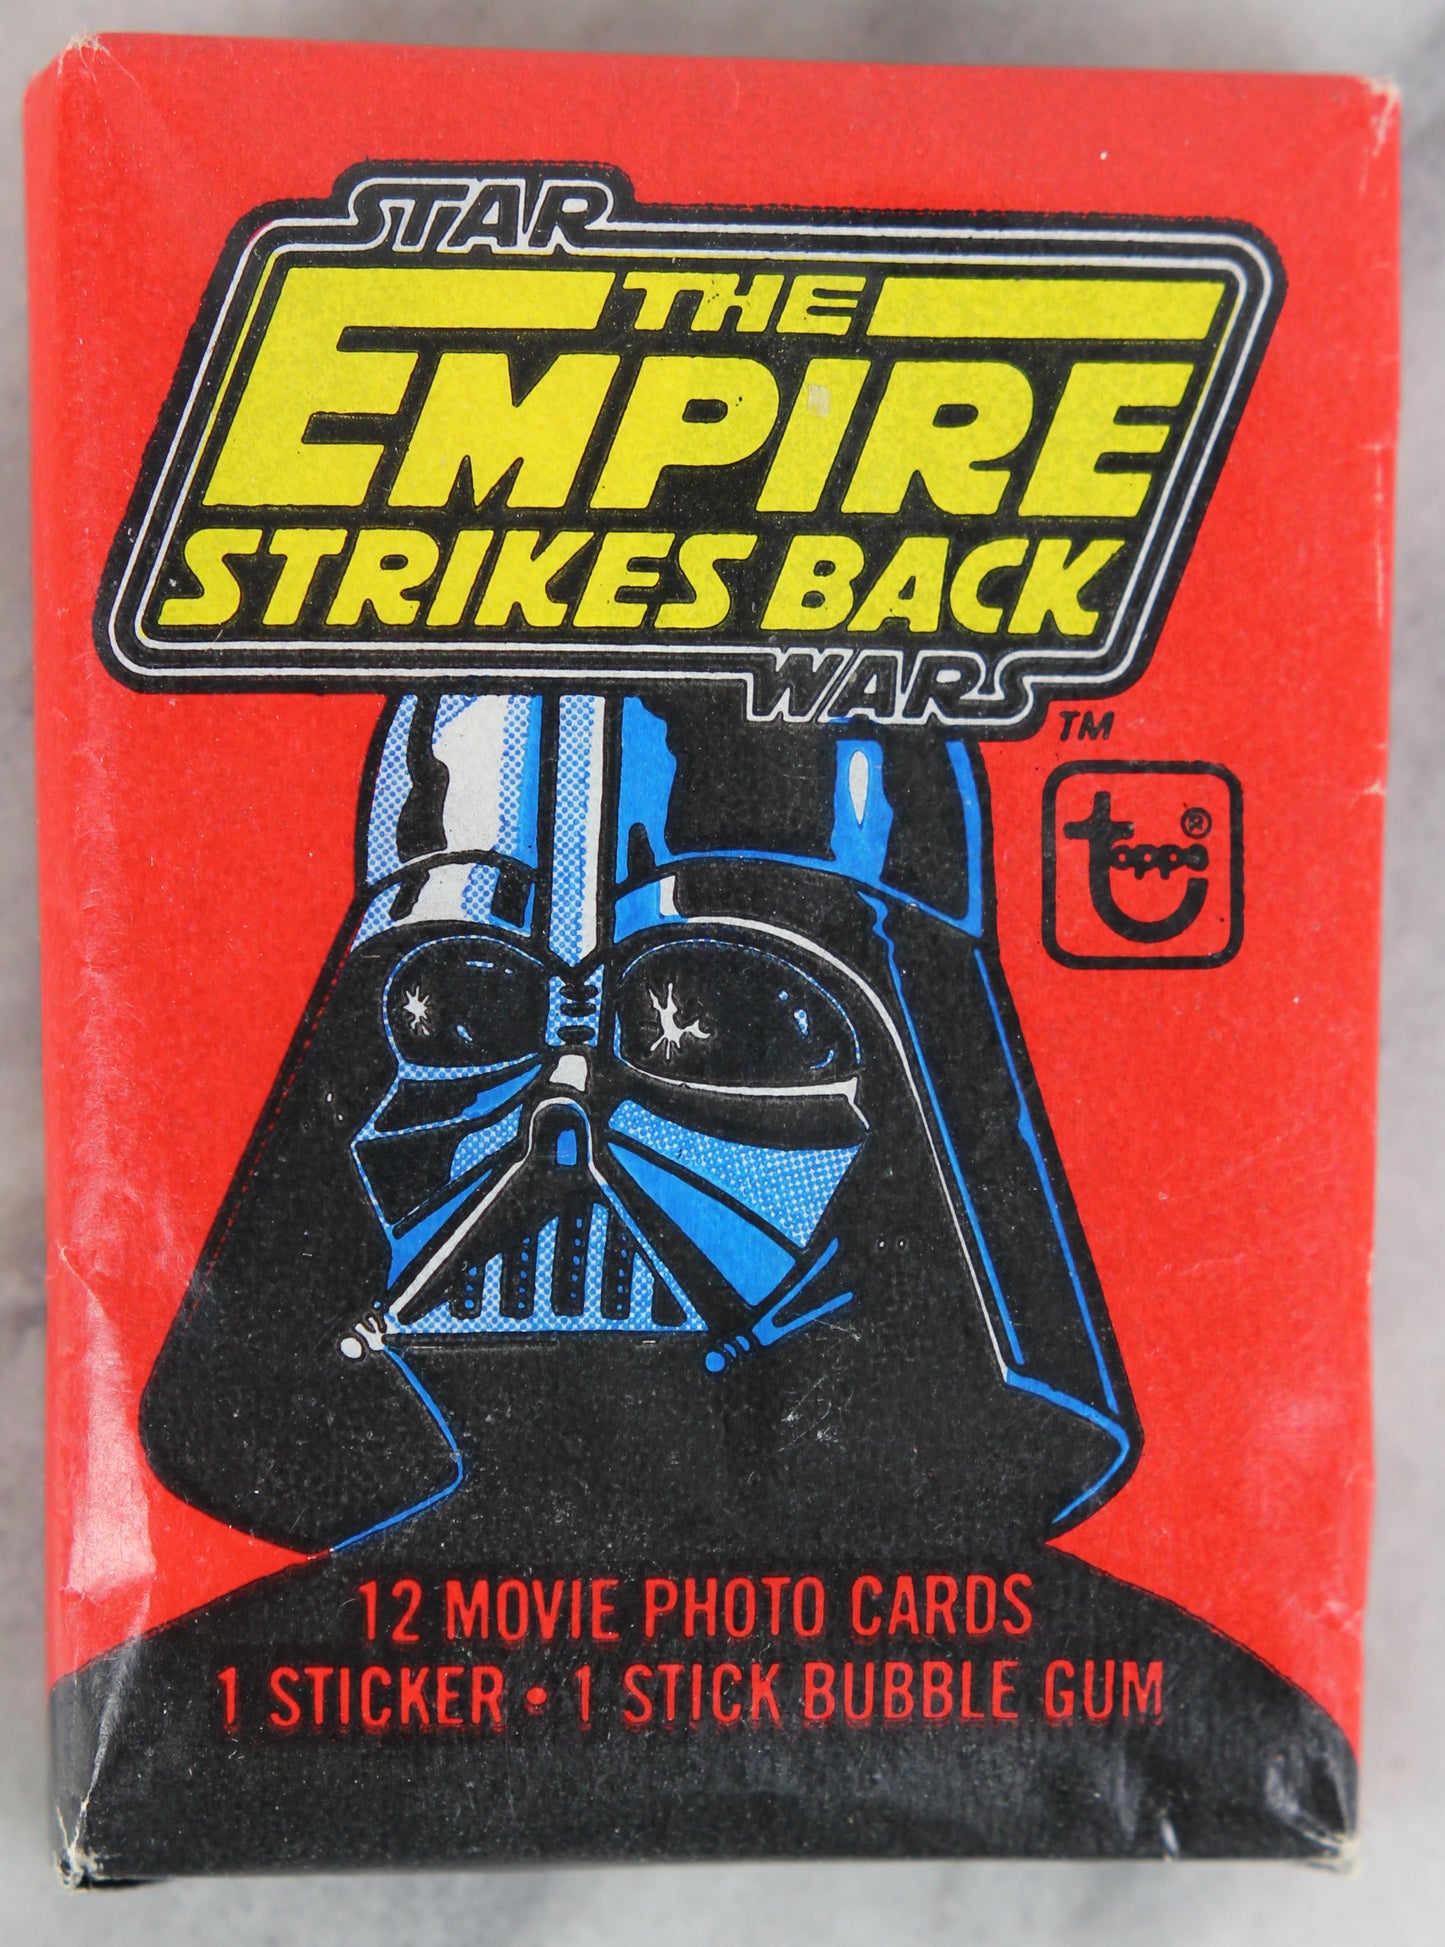 Topps Star Wars The Empire Strikes Back Series 1 Collectible Trading Cards, One Wax Pack, 1980